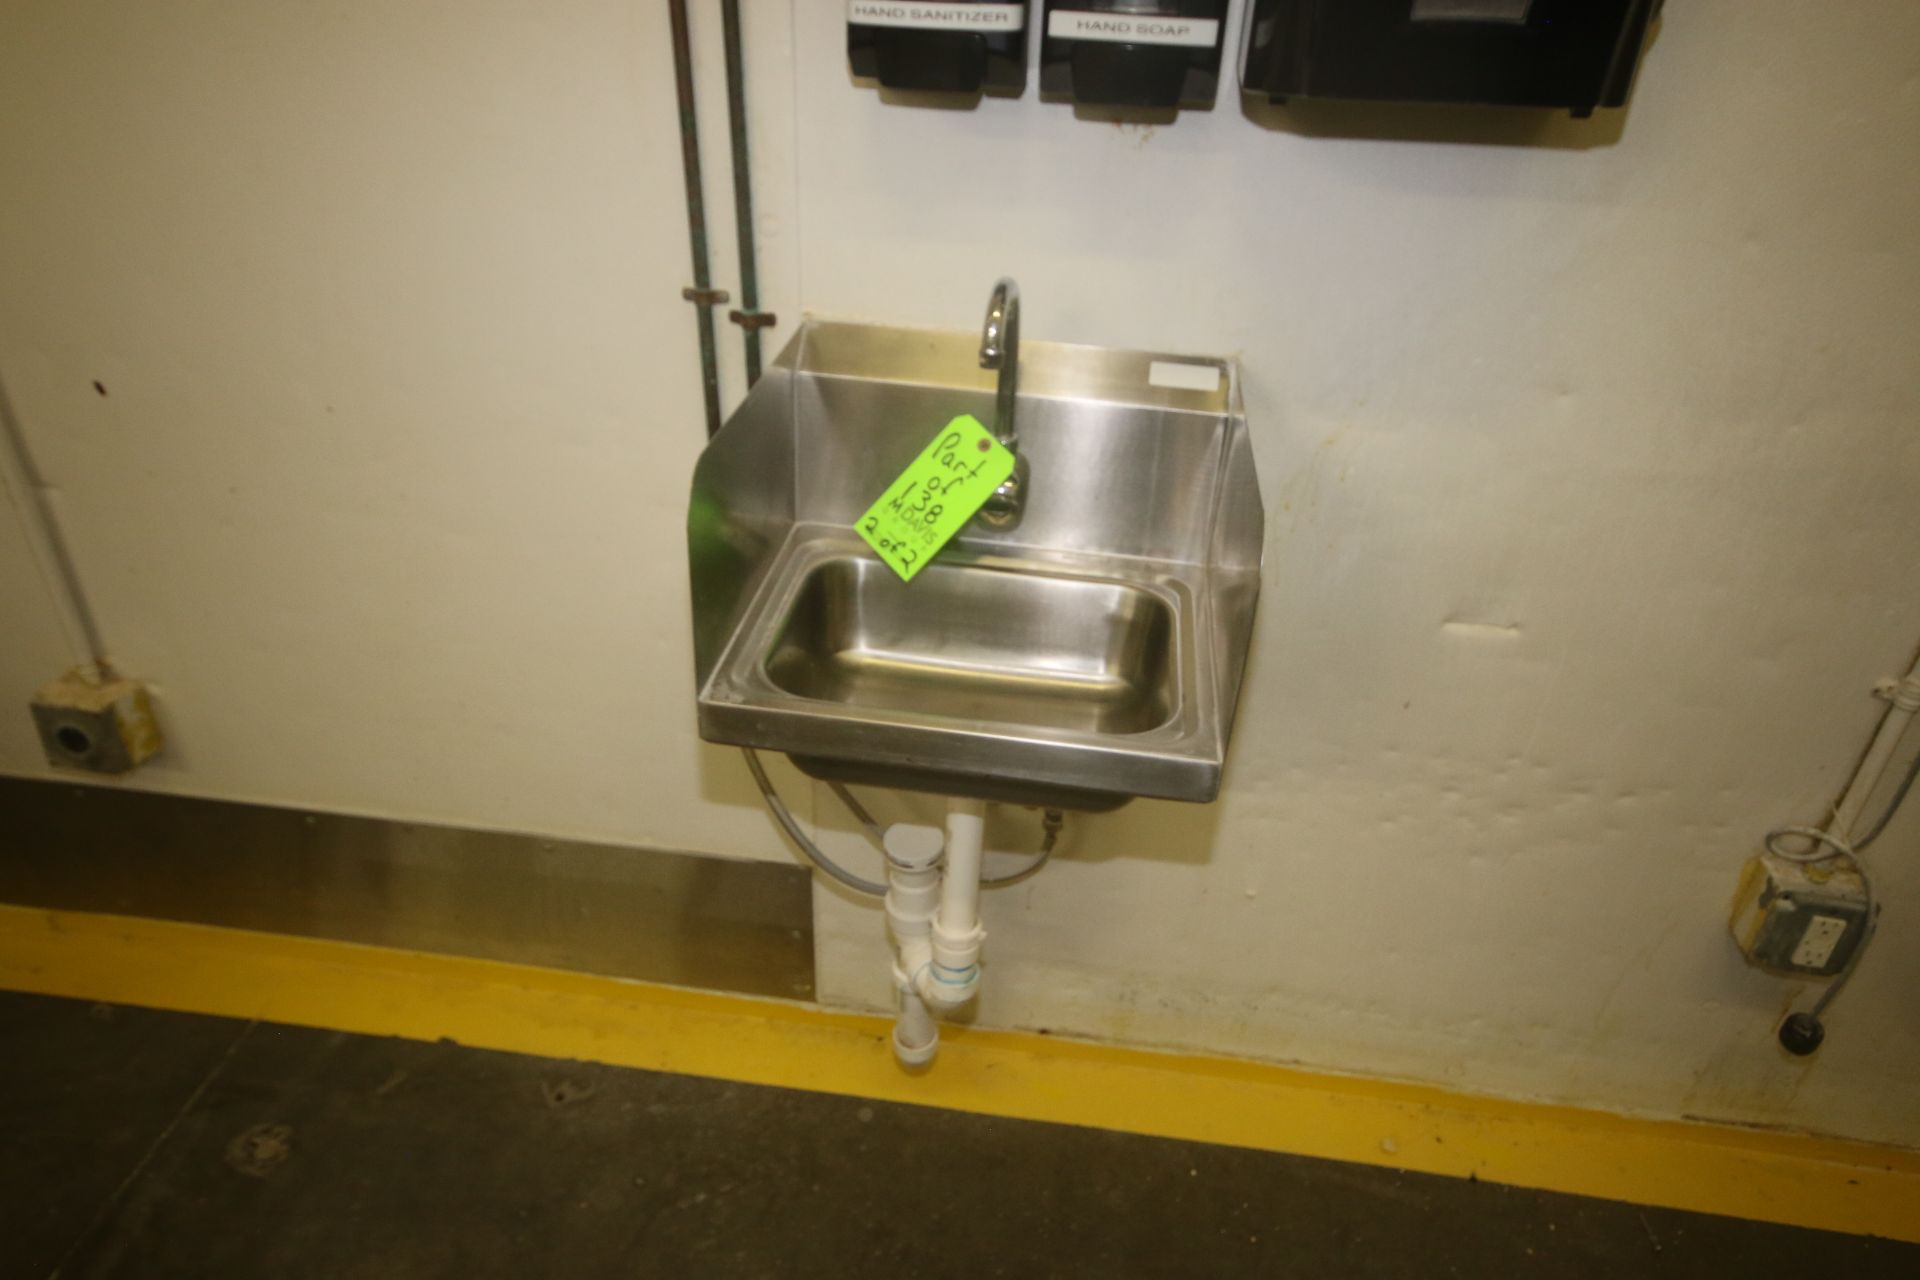 S/S Single Bowl Sinks, Wall Mounted with Motion Detection Spickets, Includes STM Technics Water - Image 2 of 3